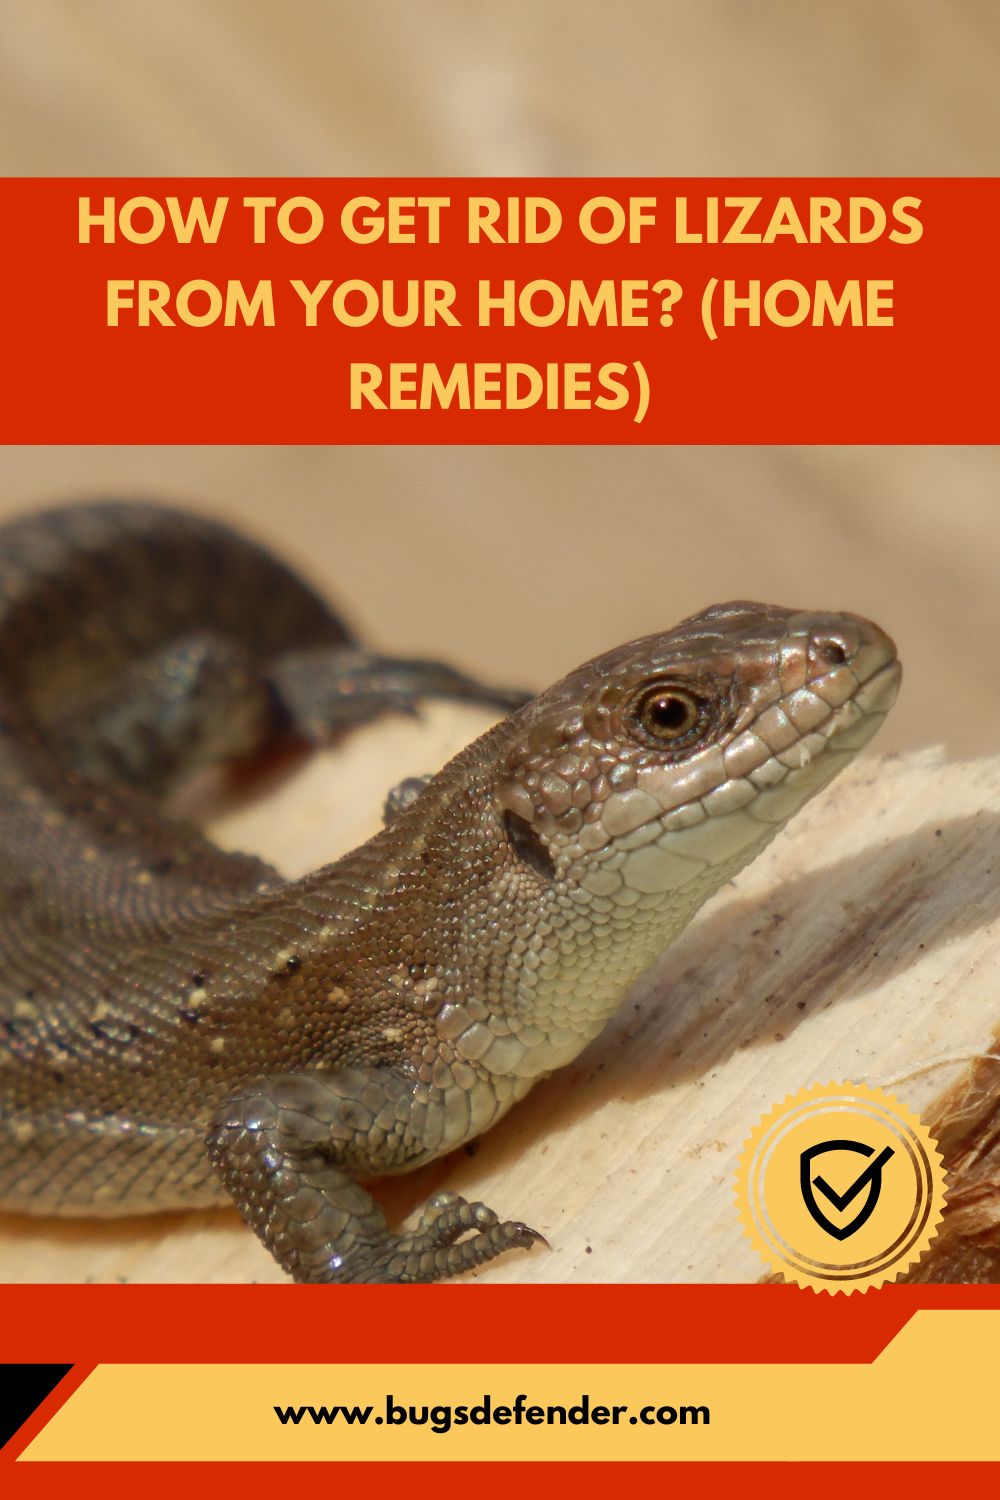 How To Get Rid Of Lizards From Your Home pin1